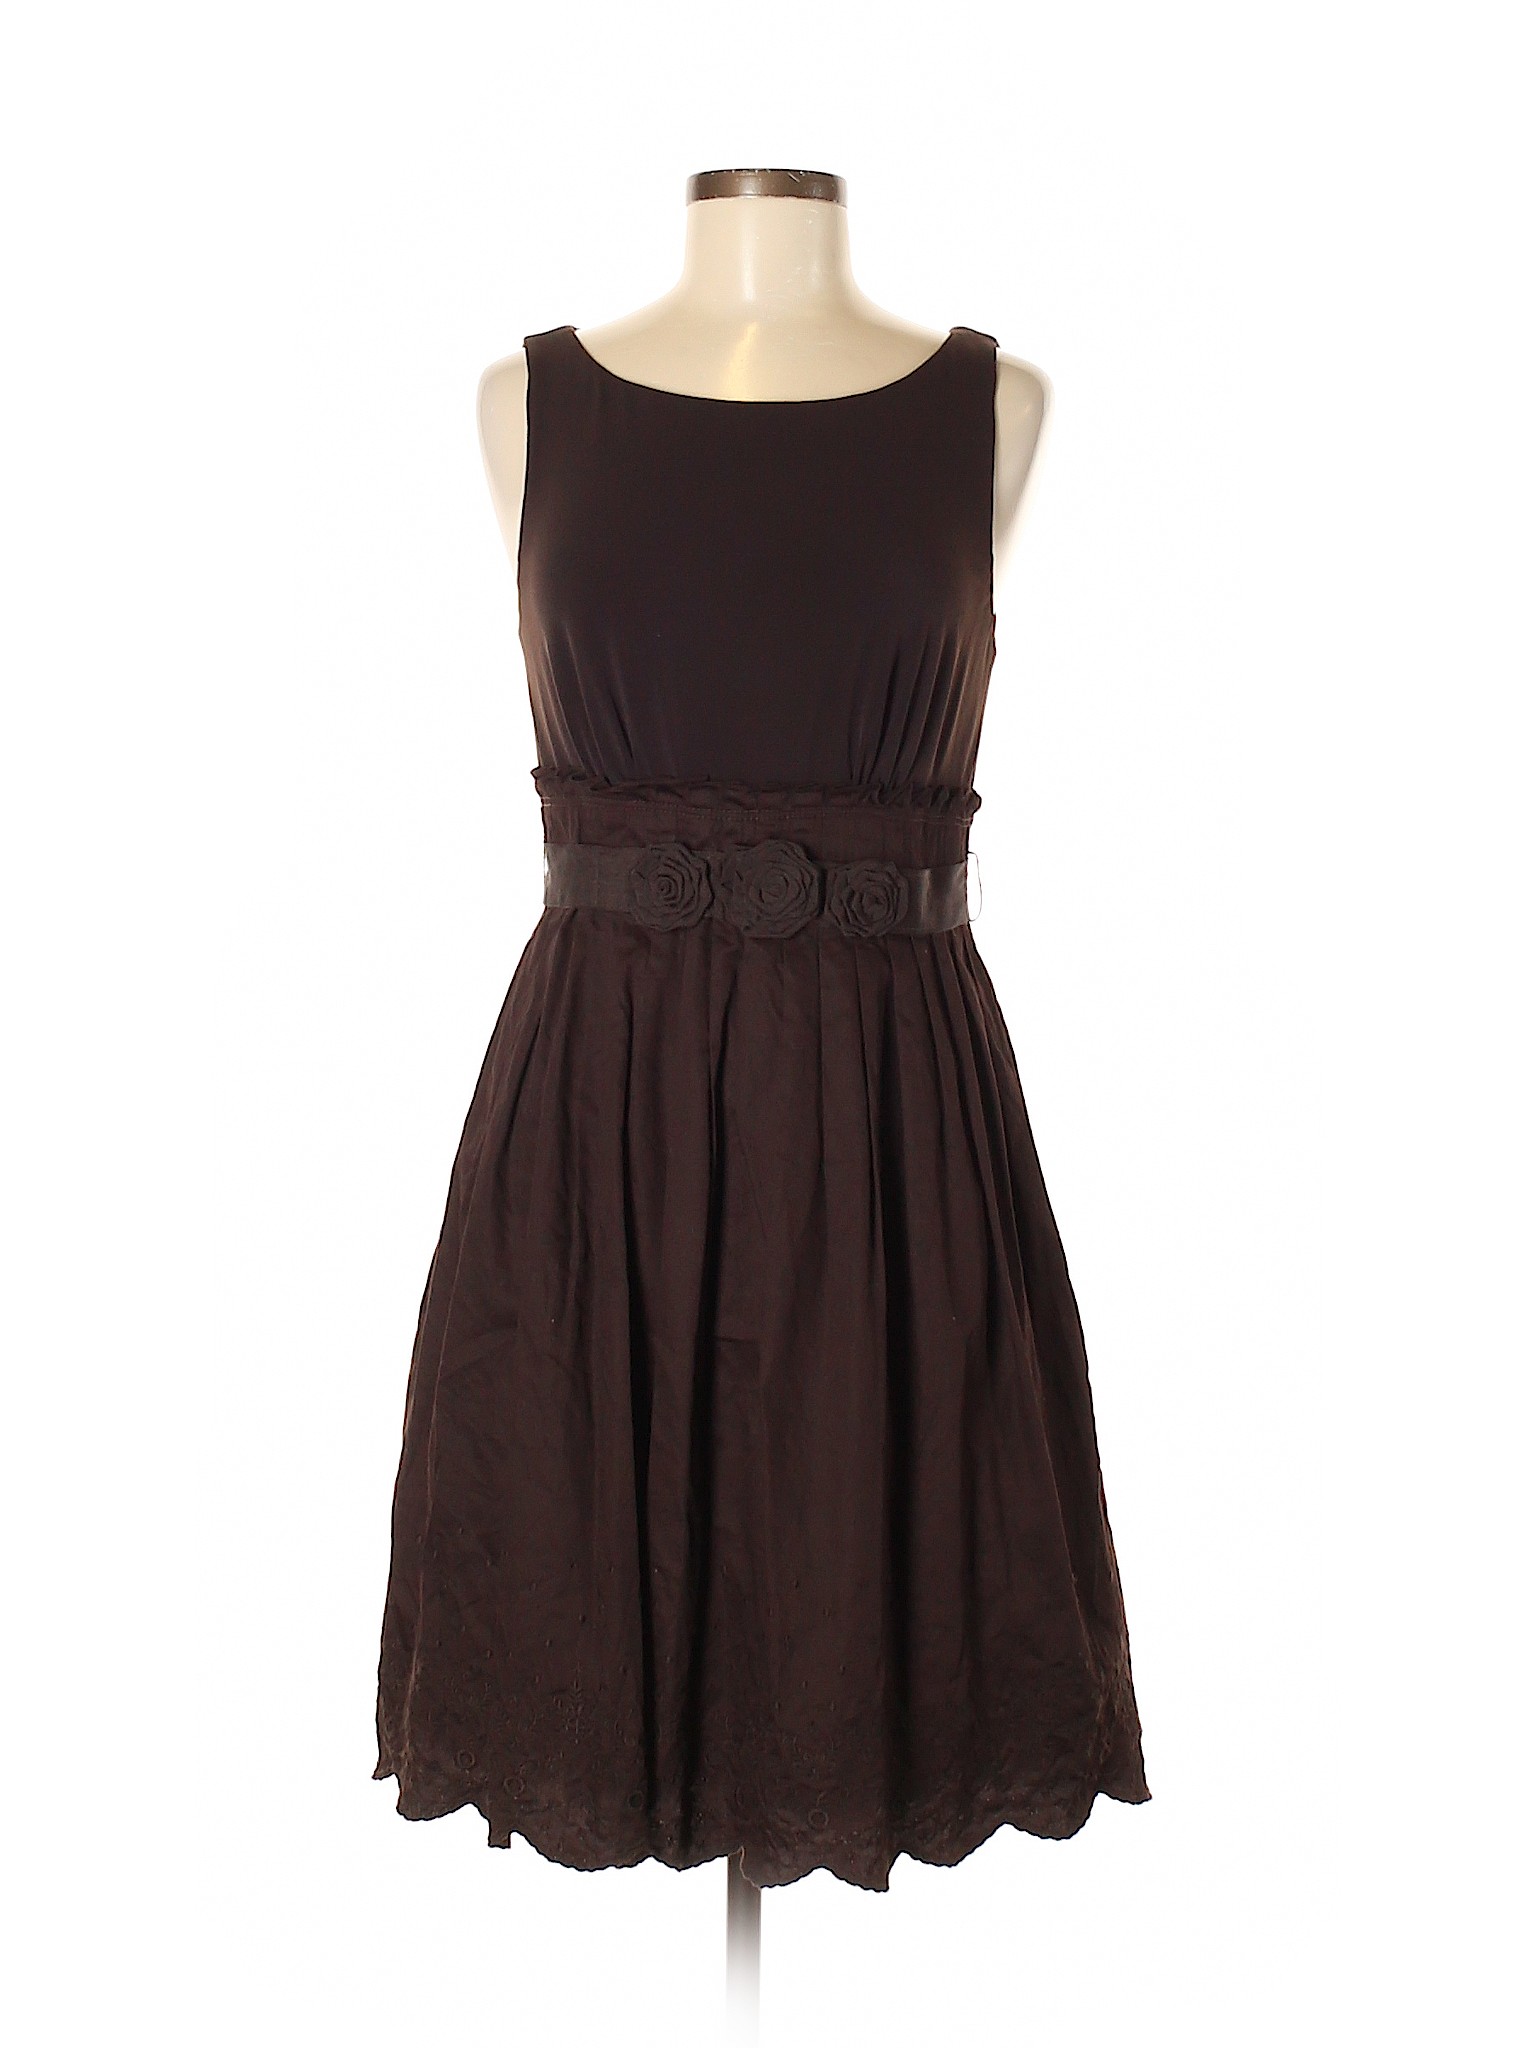 Jessica Simpson Solid Brown Casual Dress Size 8 - 74% off | thredUP